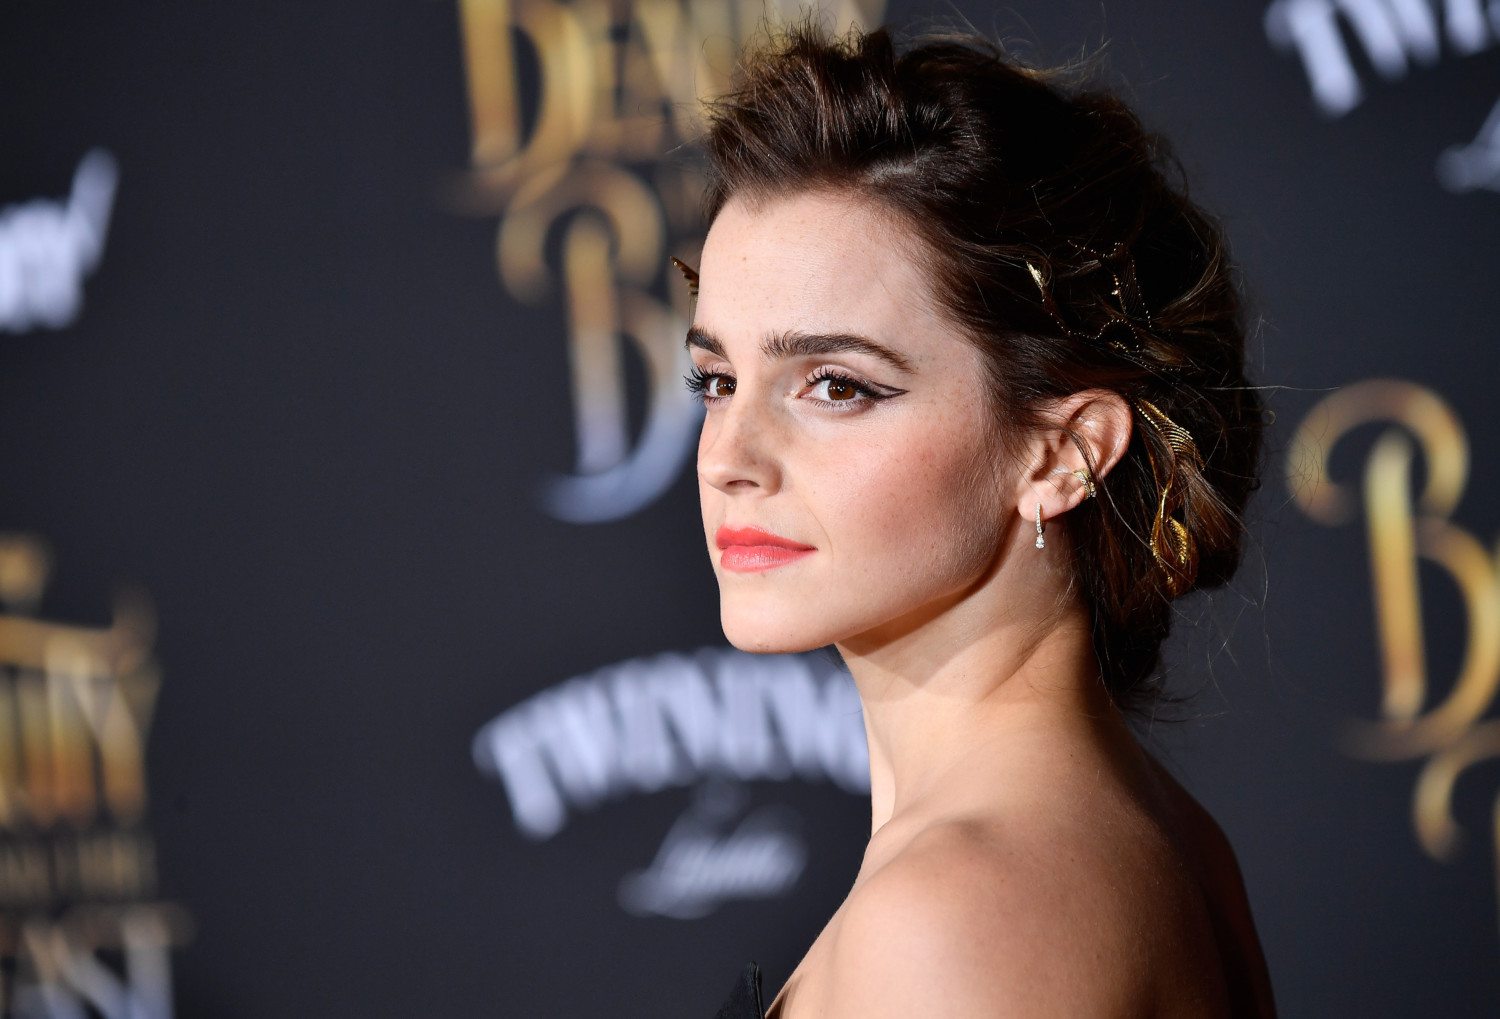 Premiere Of Disney's 'Beauty And The Beast' - Arrivals